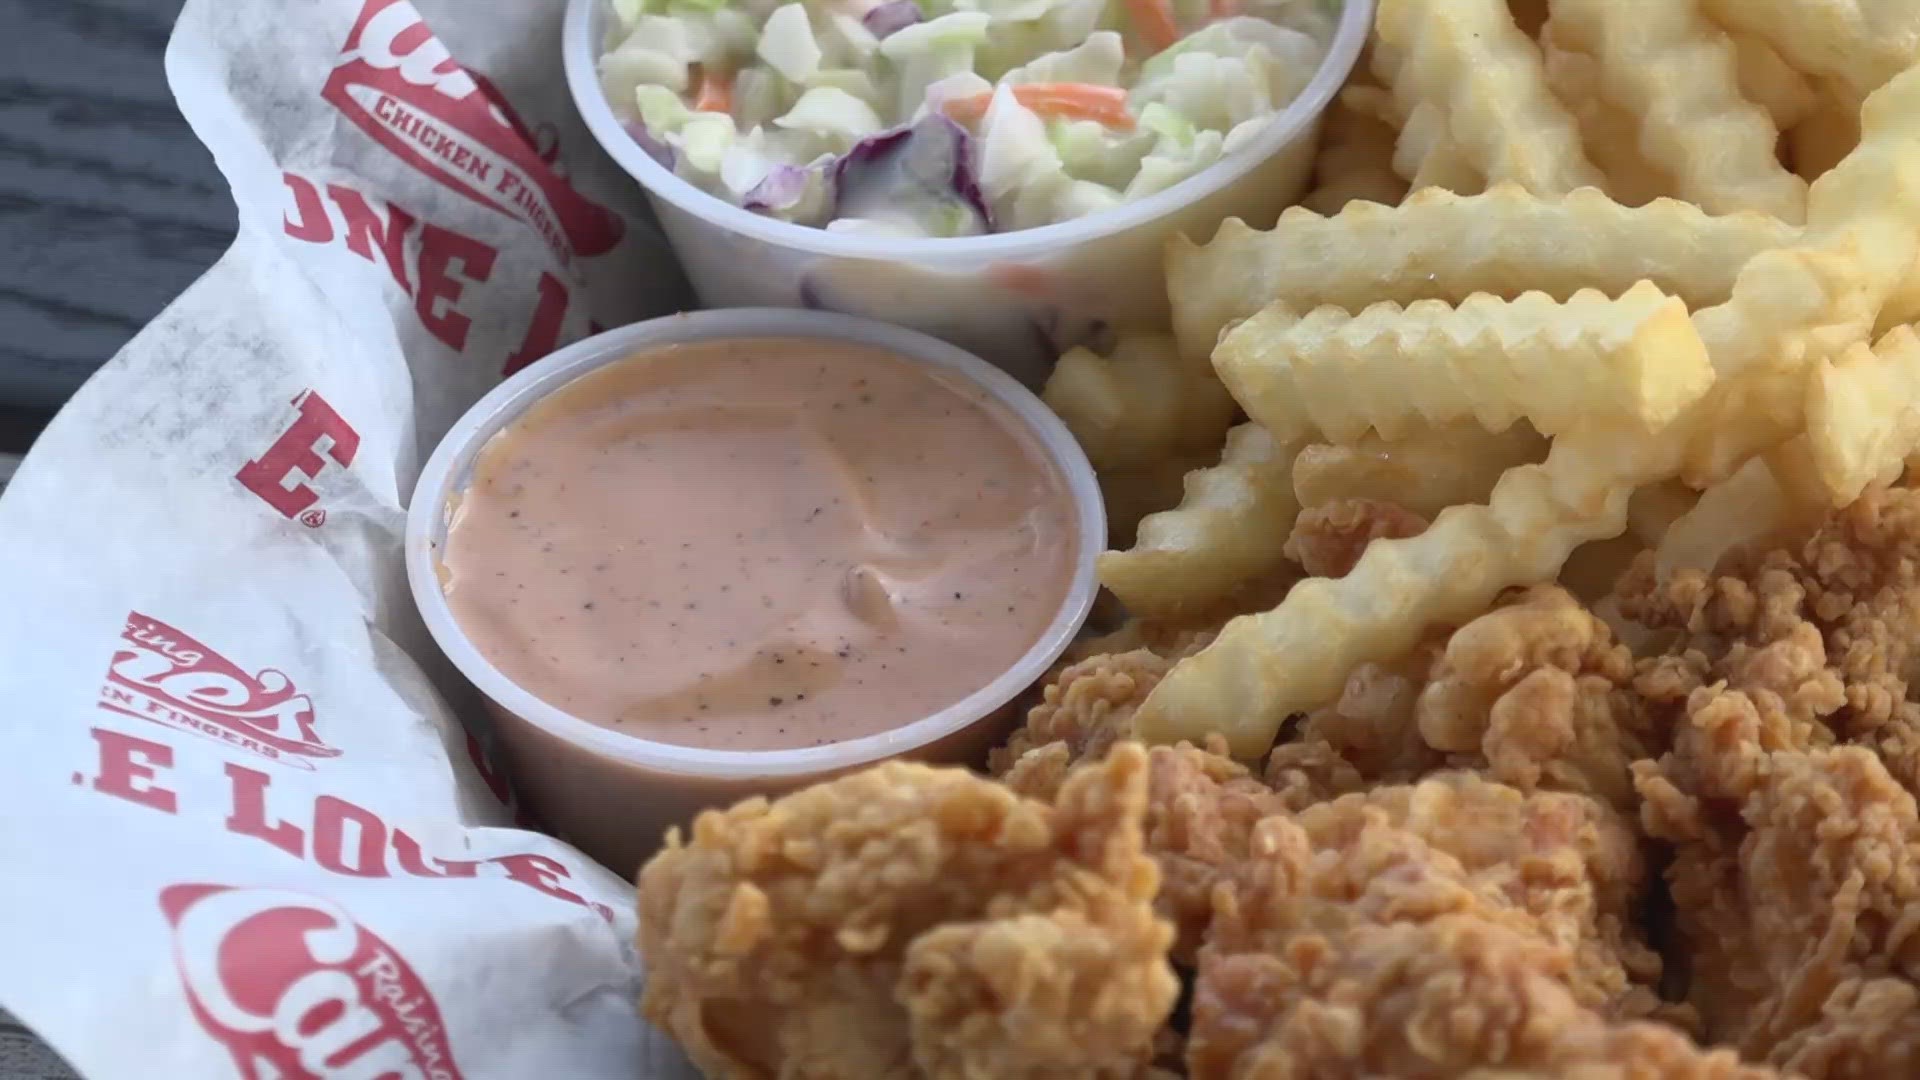 150 new jobs have arrived into the area with the latest installment to an aggressive Northern California expansion from Raising Cane's.